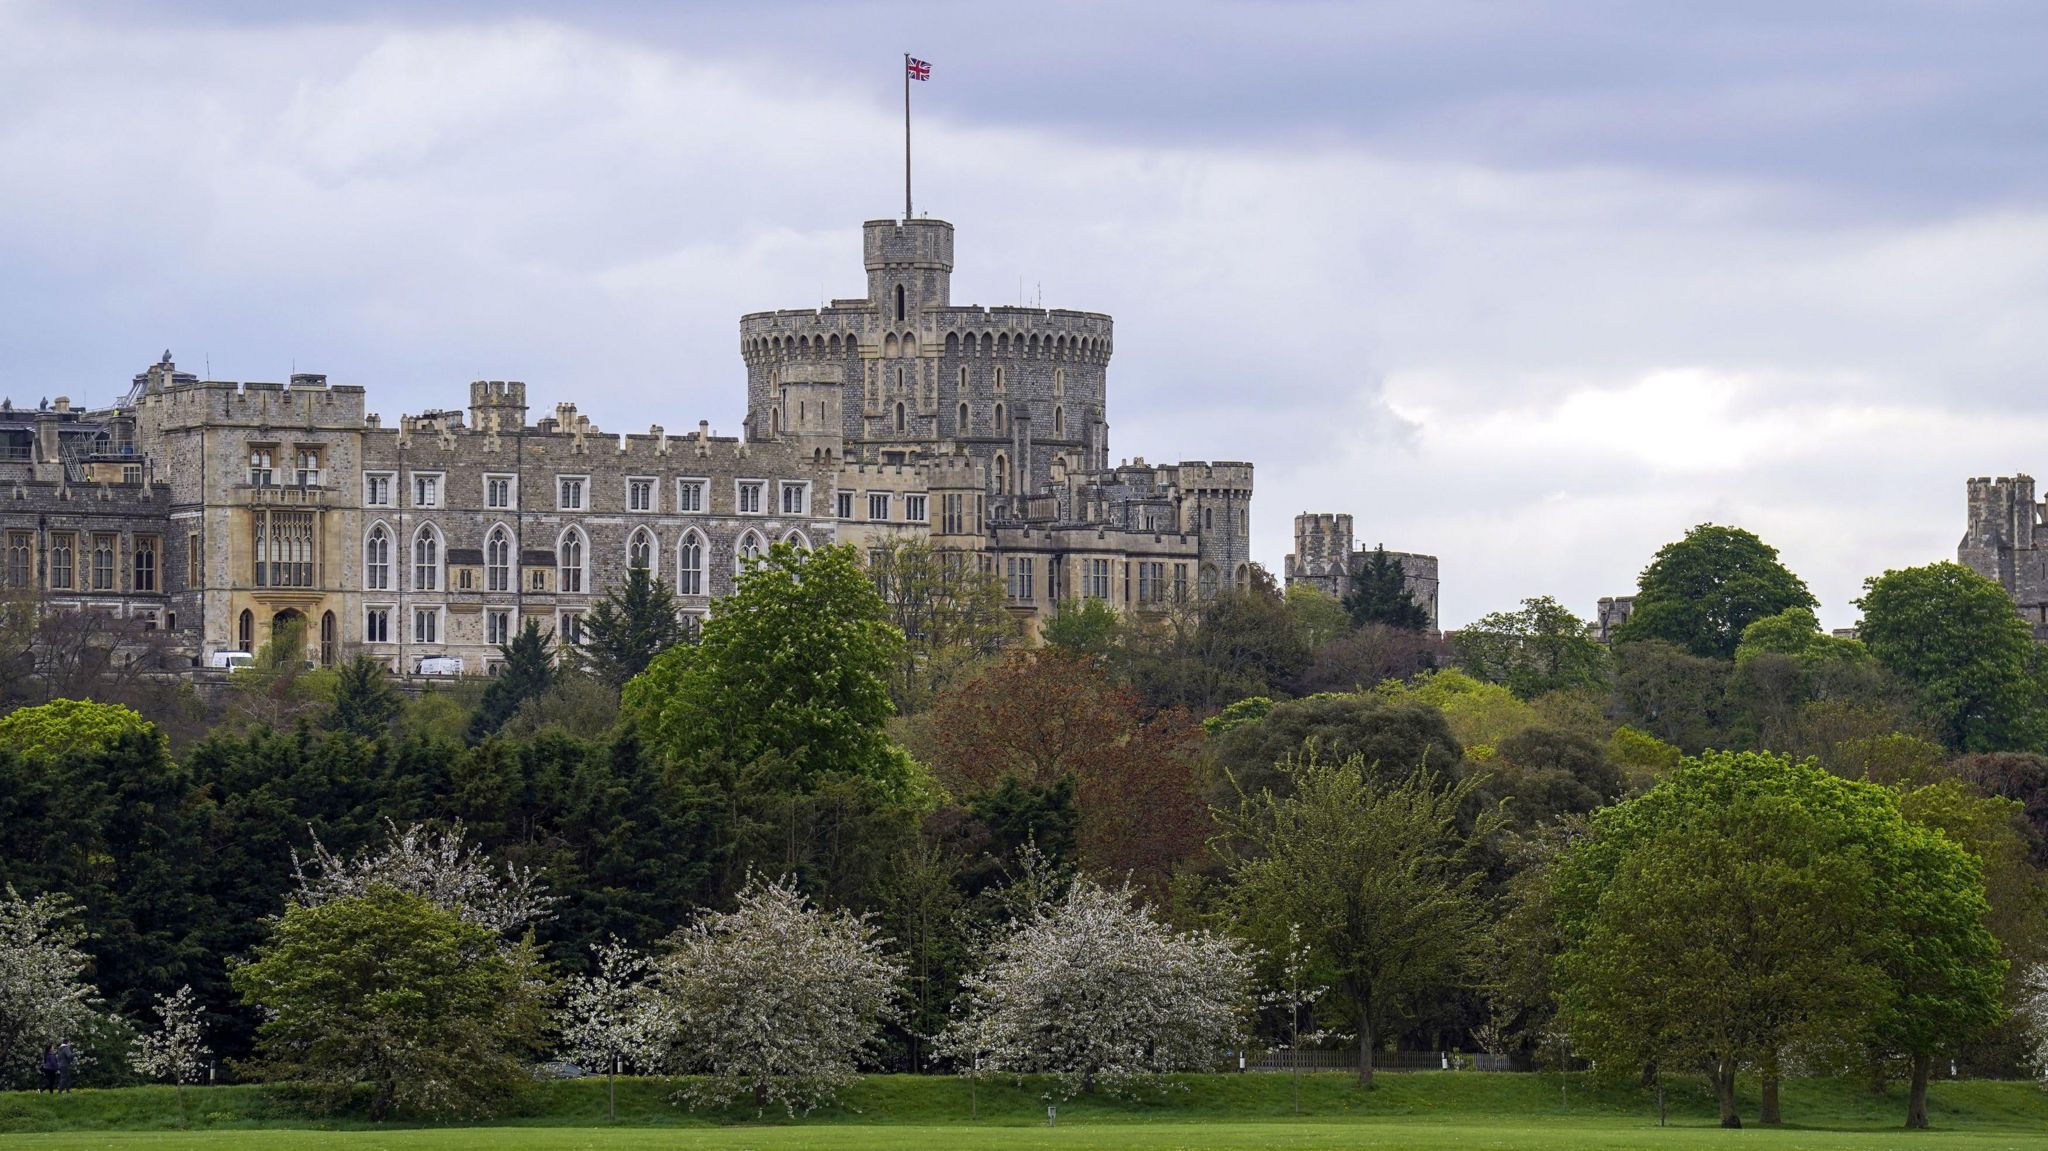 Windsor Castle exterior with trees and a field in front of it